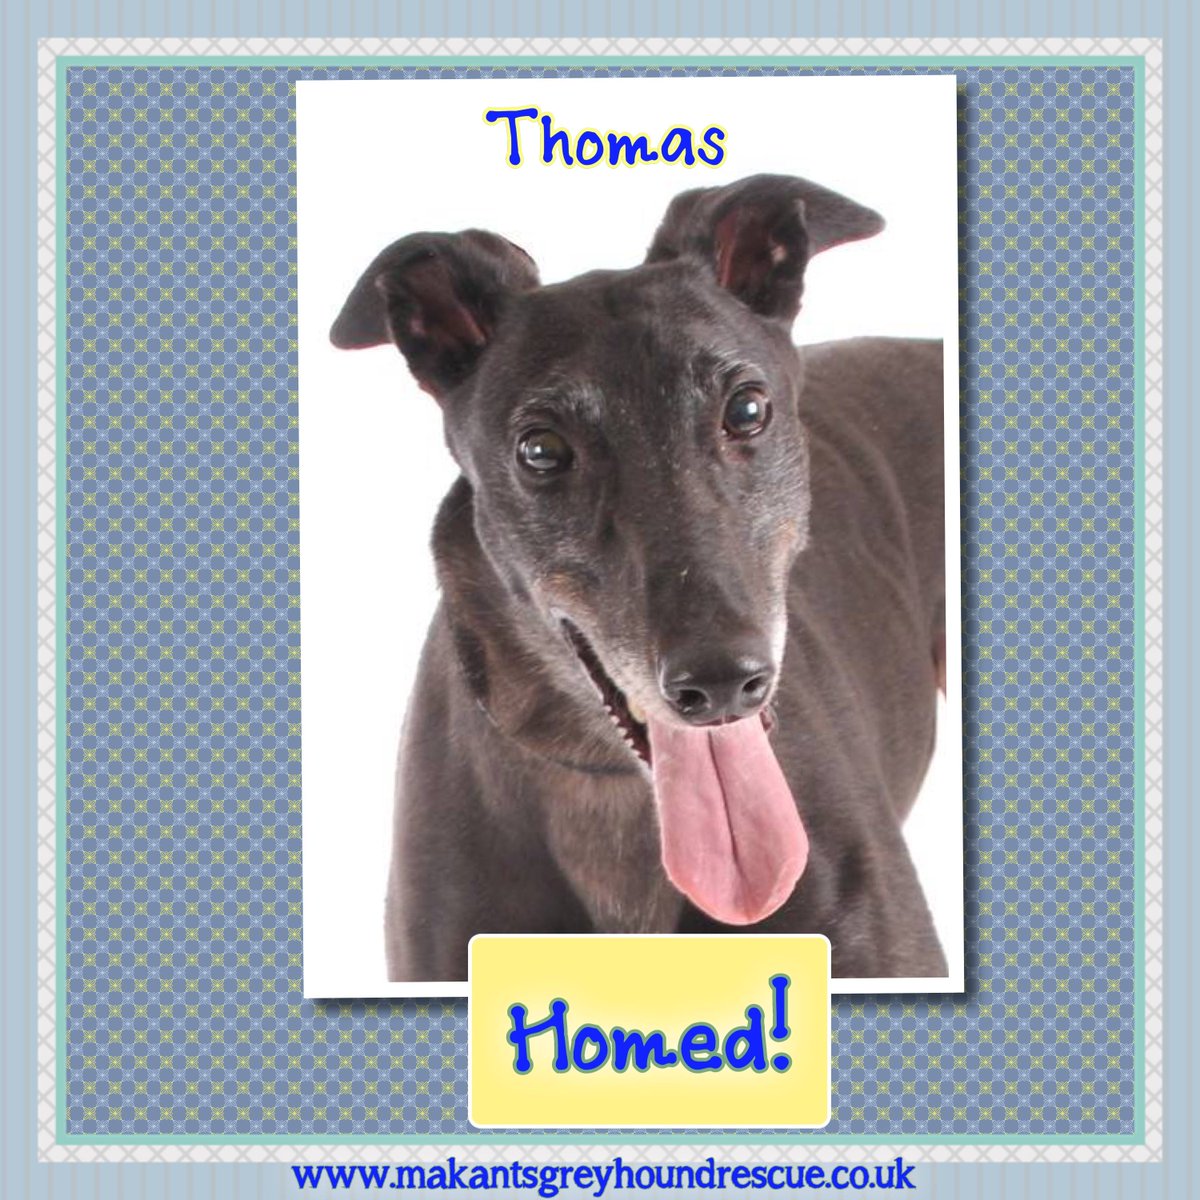 Thomas has been homed !

This lad went out on #foster late last year and never came back - good work lad! Of course this now means his Mum, Angela, is a fully paid up member of the ever growing 'failed fosterers club'. 

Thomas is now living in #LittleHulton and #lovingit !!